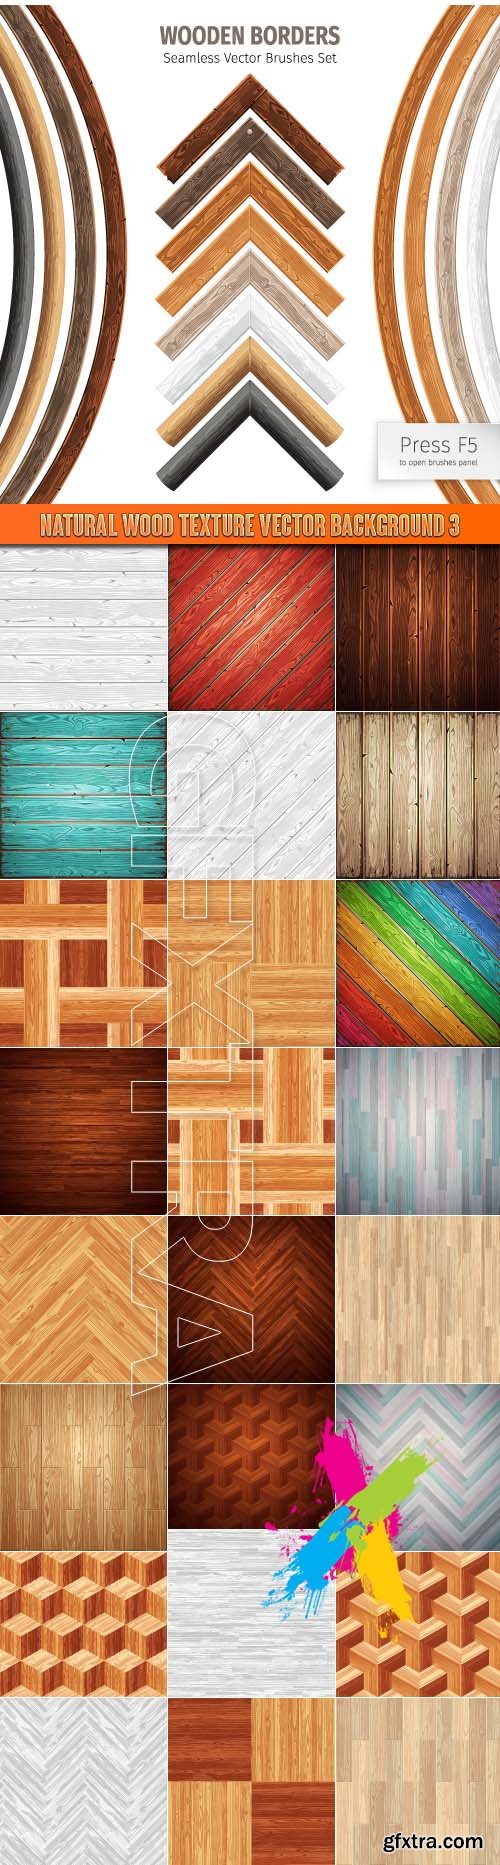 Natural wood texture vector background 3